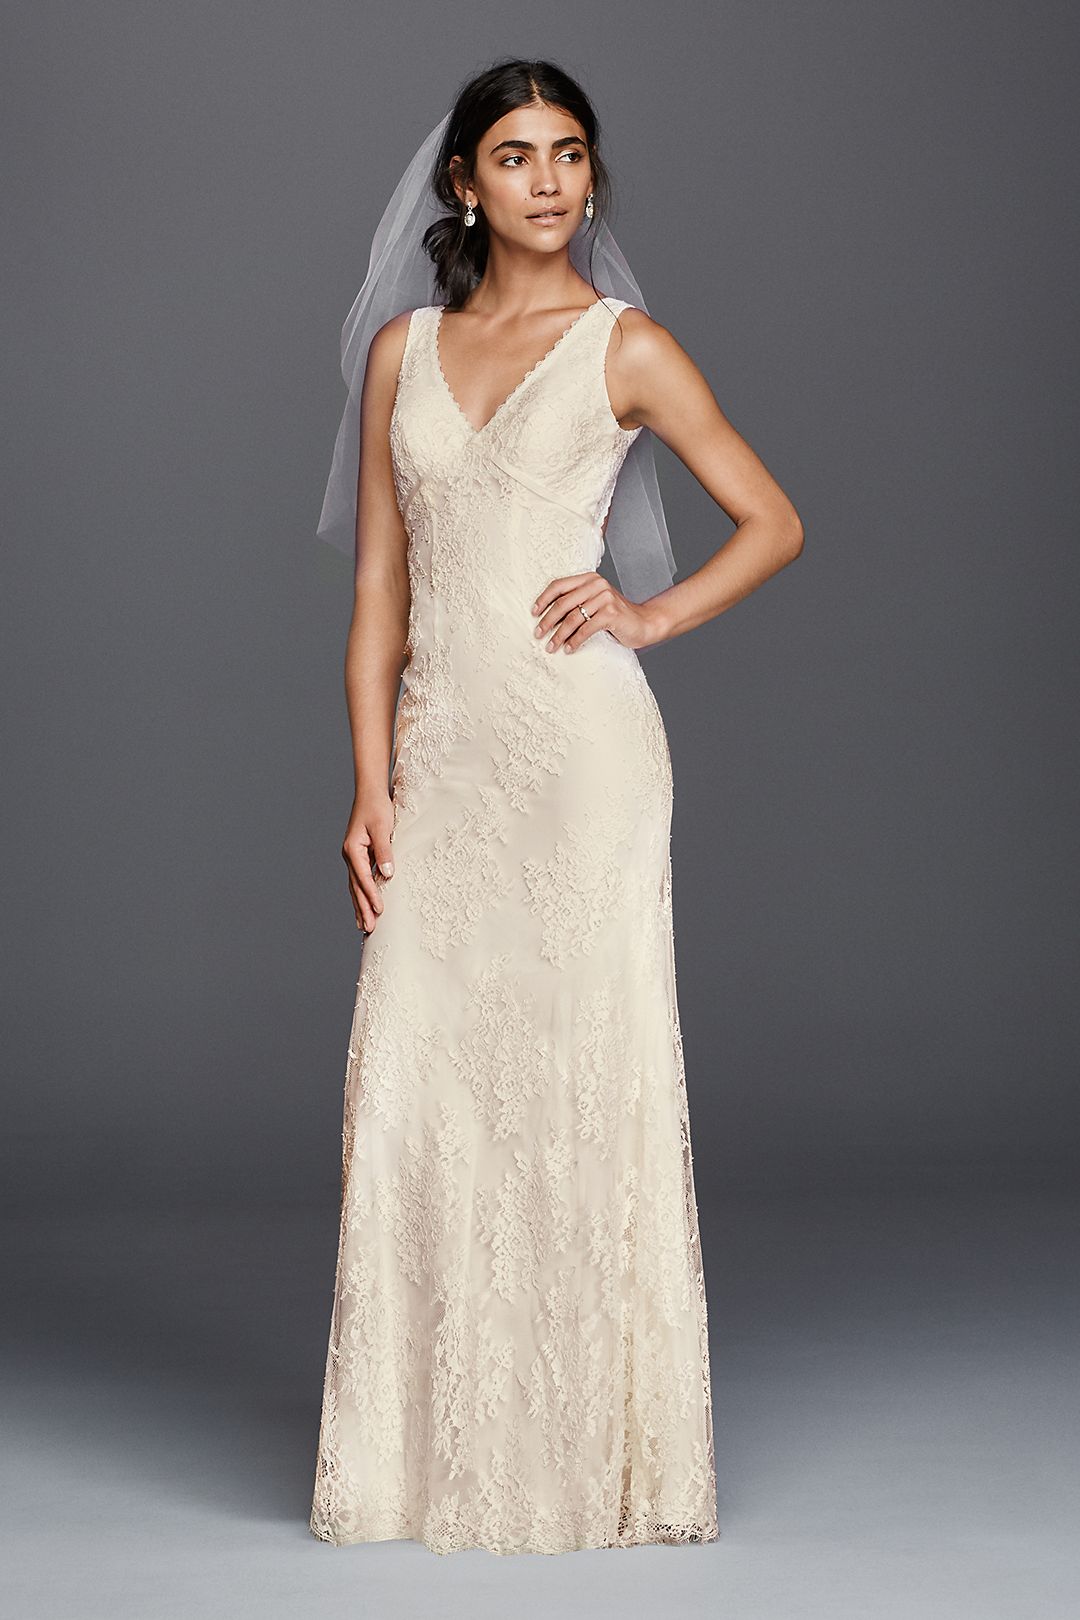 As-Is Floral Lace V-Neck Wedding Dress  Image 1